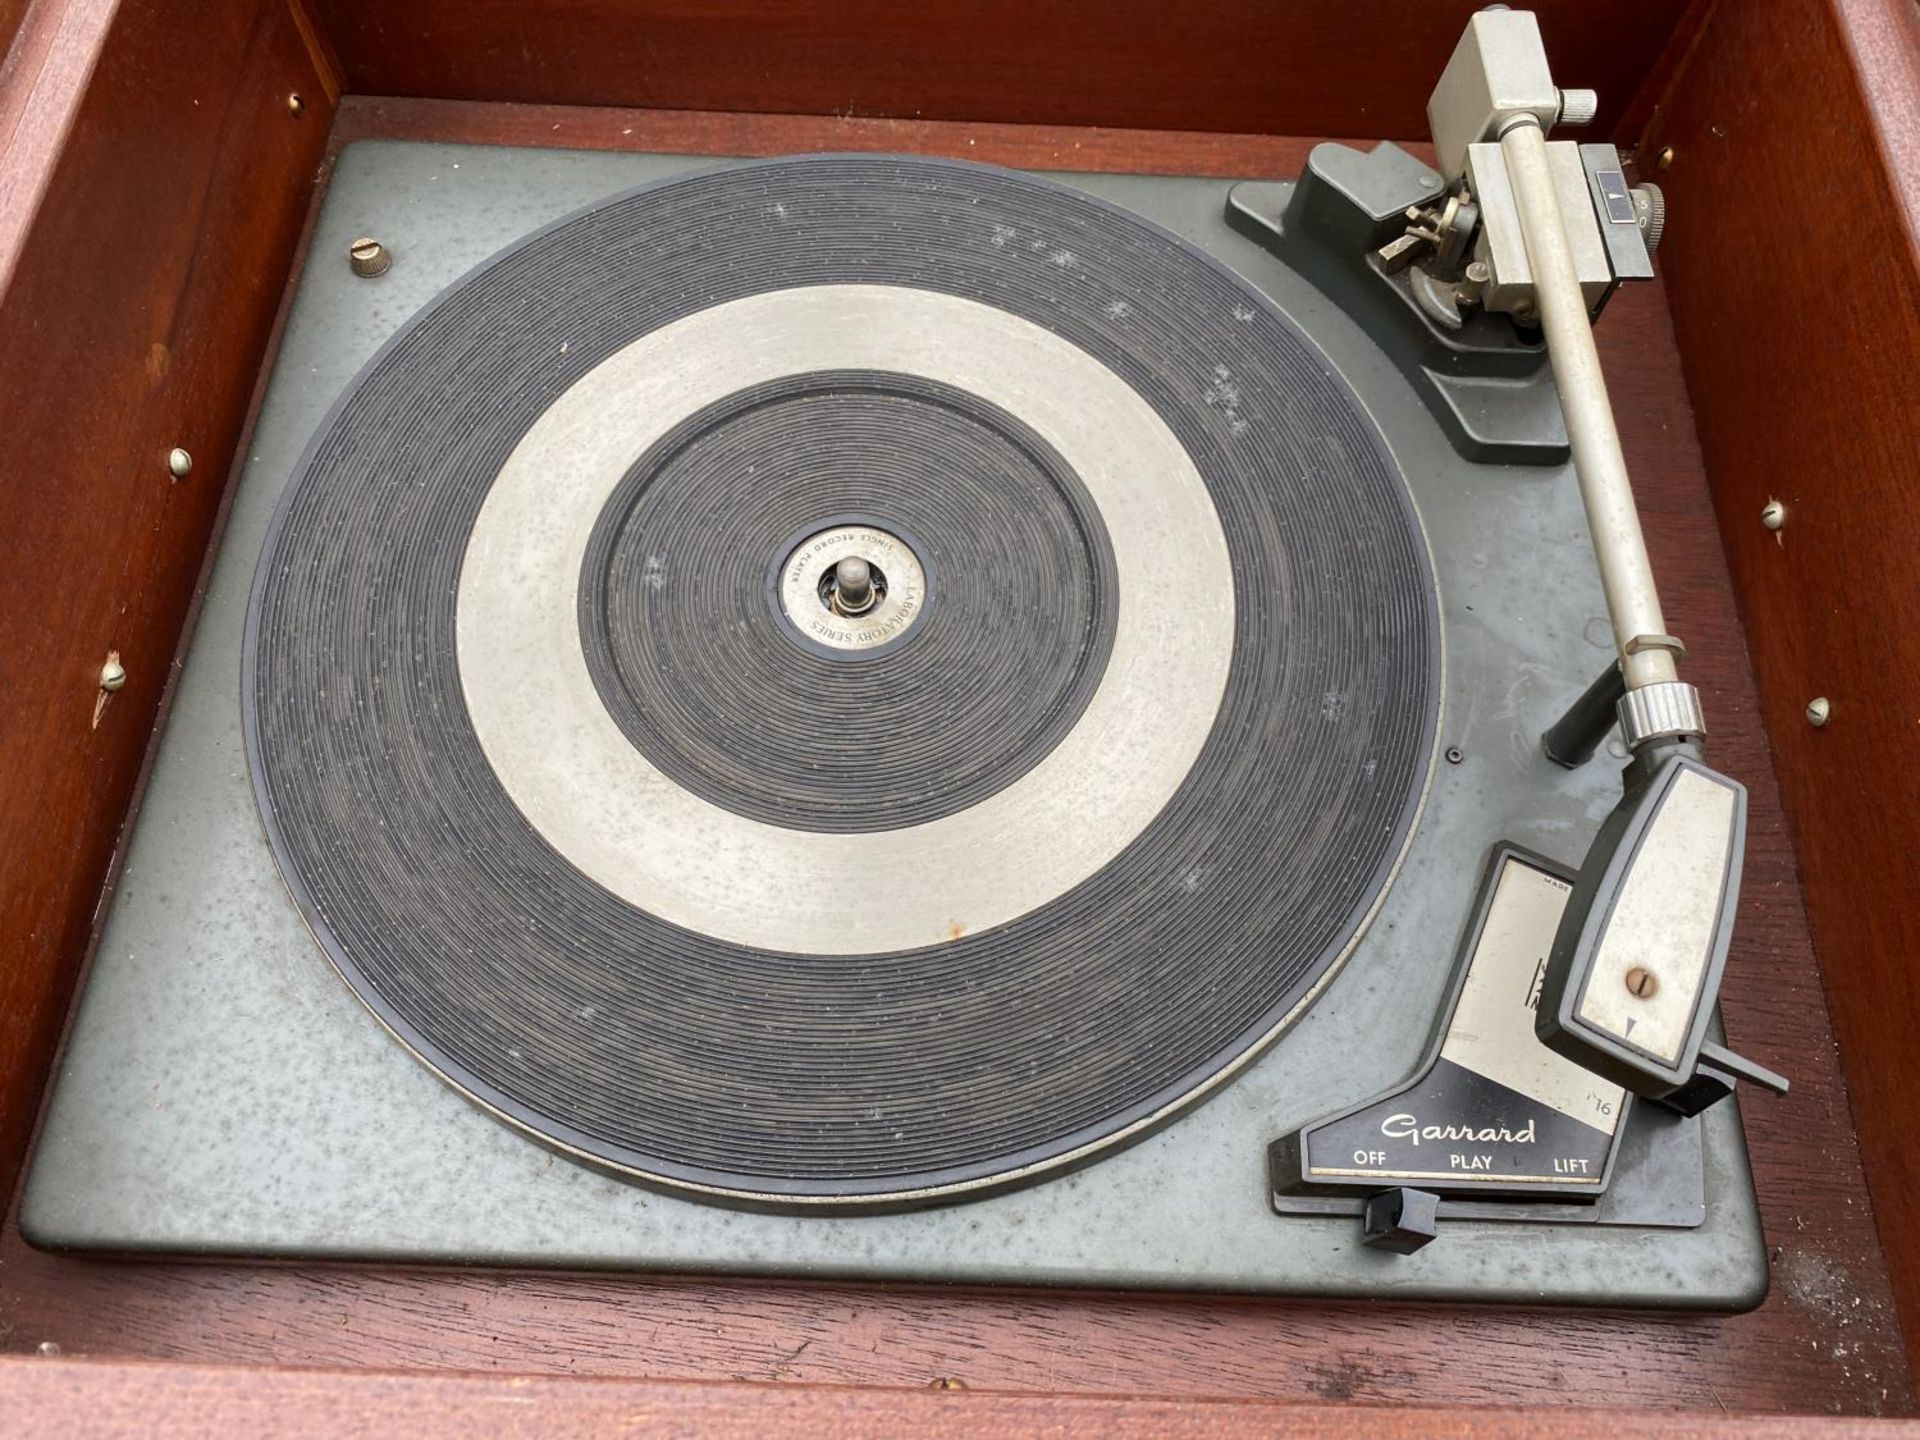 A WOODEN STEREO UNIT WITH A GARRARD SP.25 MK11 RECORD DECK - Image 3 of 5